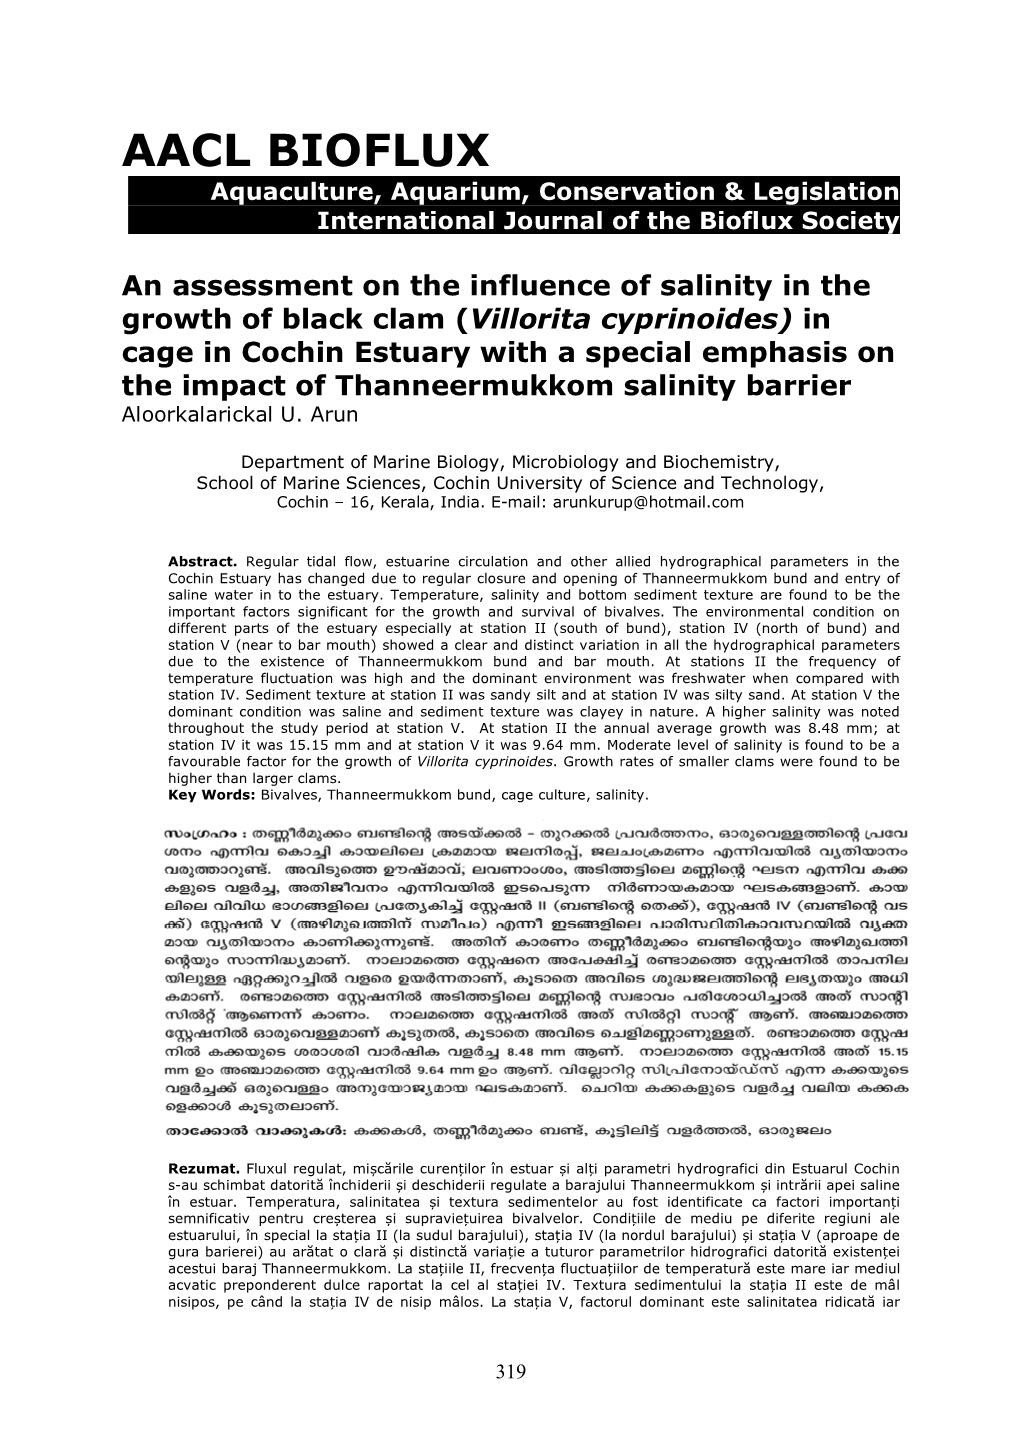 An Assessment on the Influence of Salinity in the Growth of Black Clam